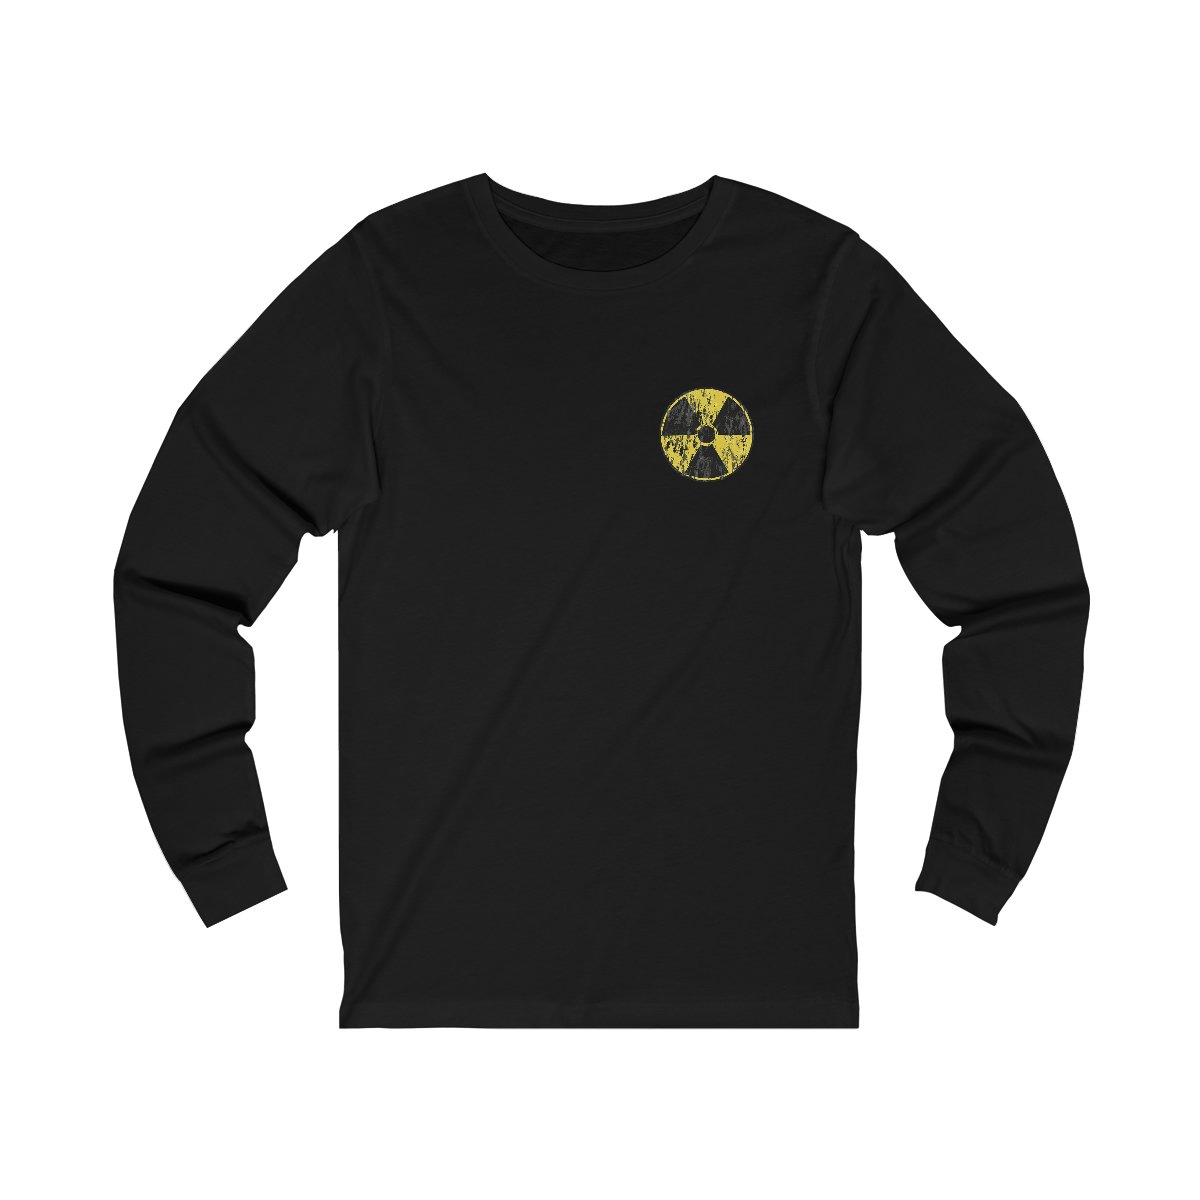 Ultimatum – Symphonic Extremities Nuclear Option Long Sleeve Tshirt 3501D